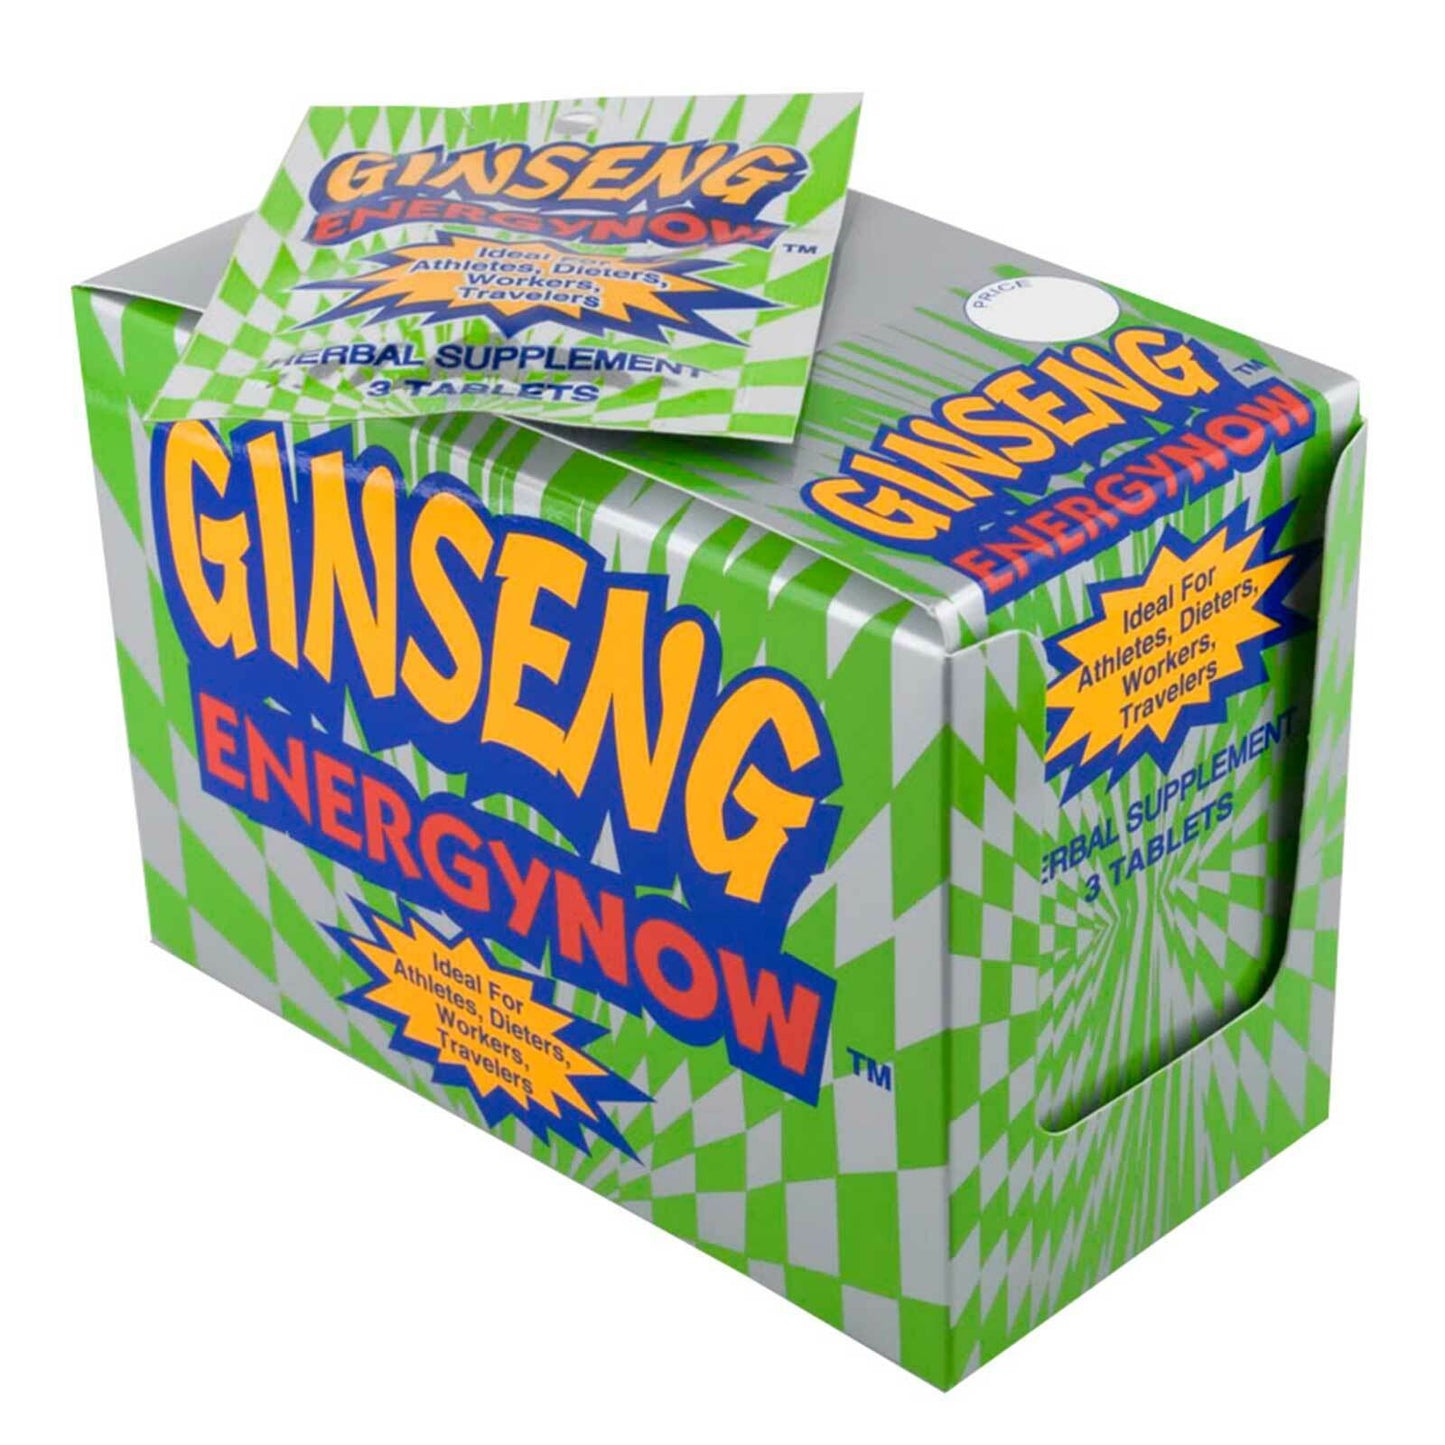 Ginseng Energy Now, Herbal Supplements (24 Packs x 3 Tablets in Each)